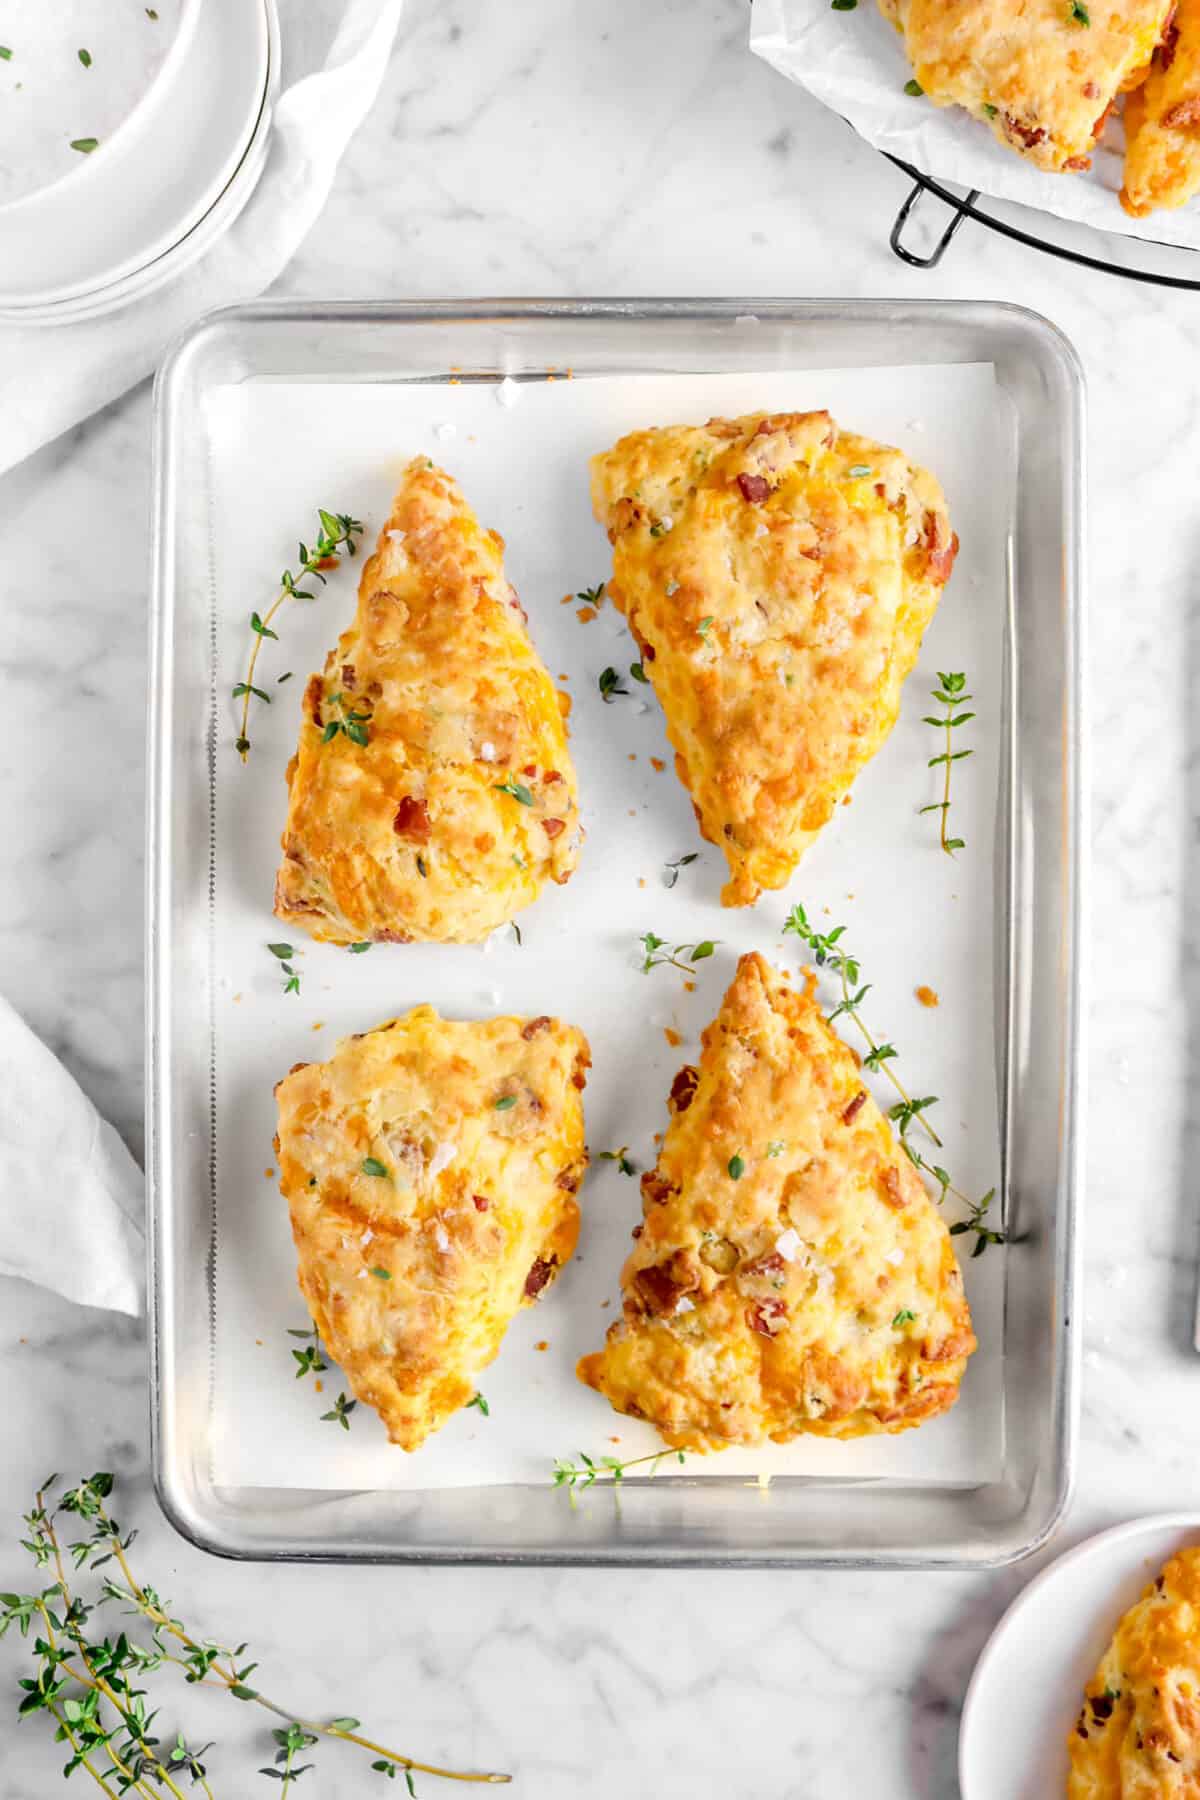 four scones on sheet pan with thyme sprigs, a napkin, plates, and more scones in the top right and bottom left corners of the image